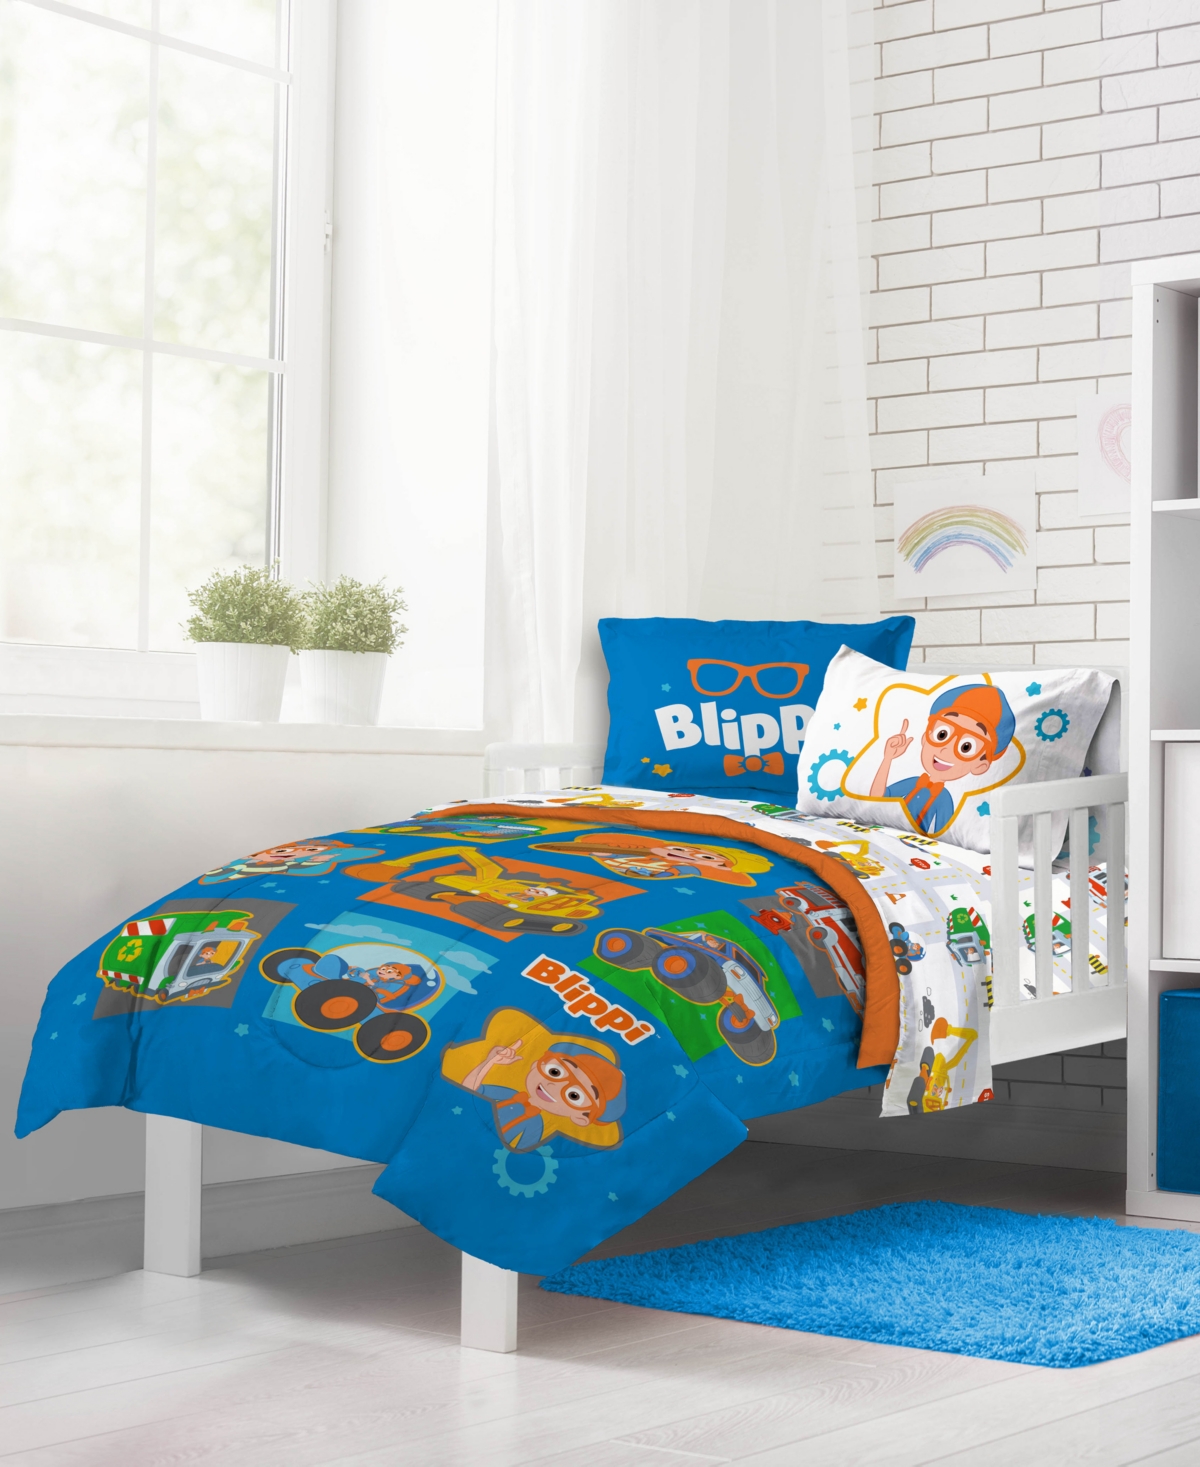 Blippi Moonbug How Does This Work 5 Piece Comforter Set, Twin In Blue